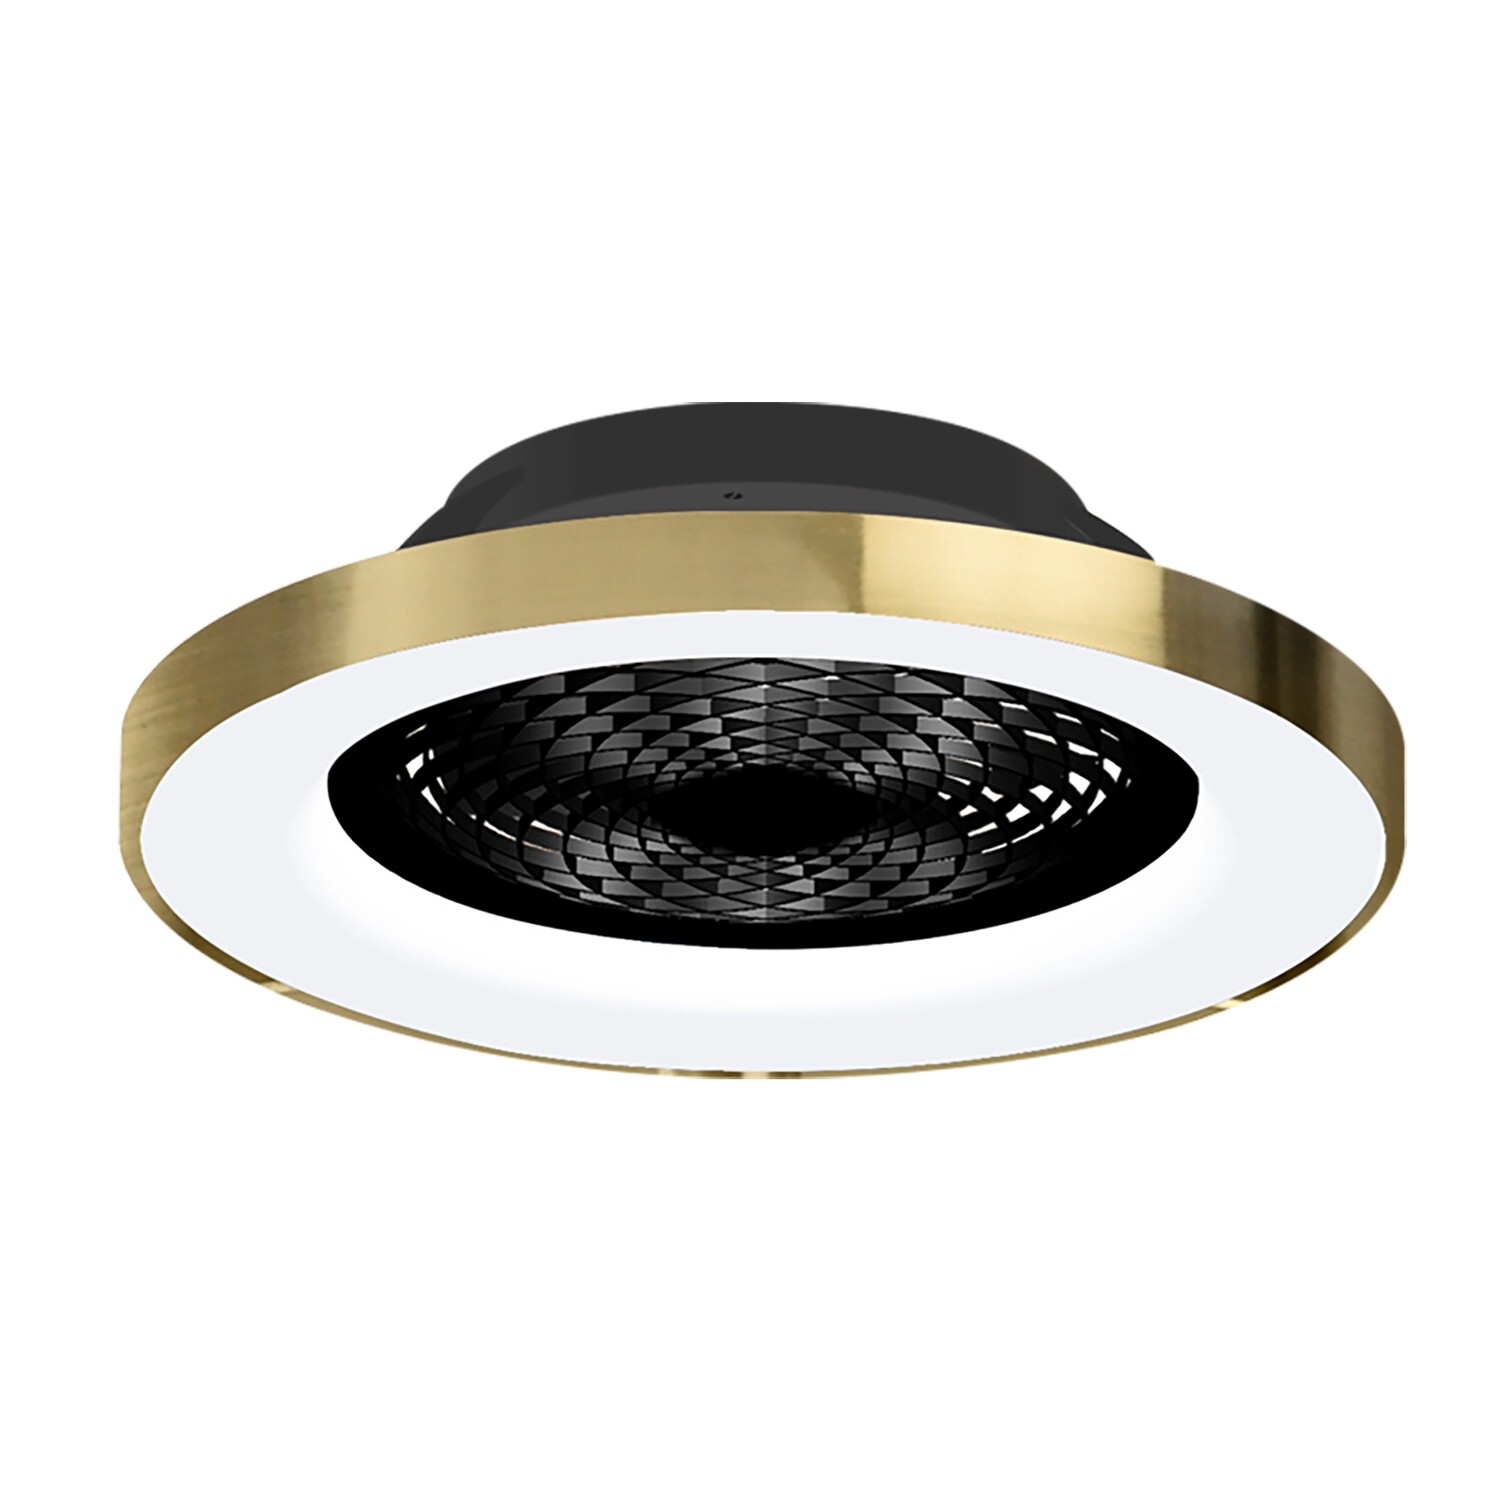 Tibet 70W LED Dimmable Ceiling Light With Built-In 35W DC Fan c/w Remote Control, APP & Alexa/Google Voice Control, 3900lm, Gold/Black